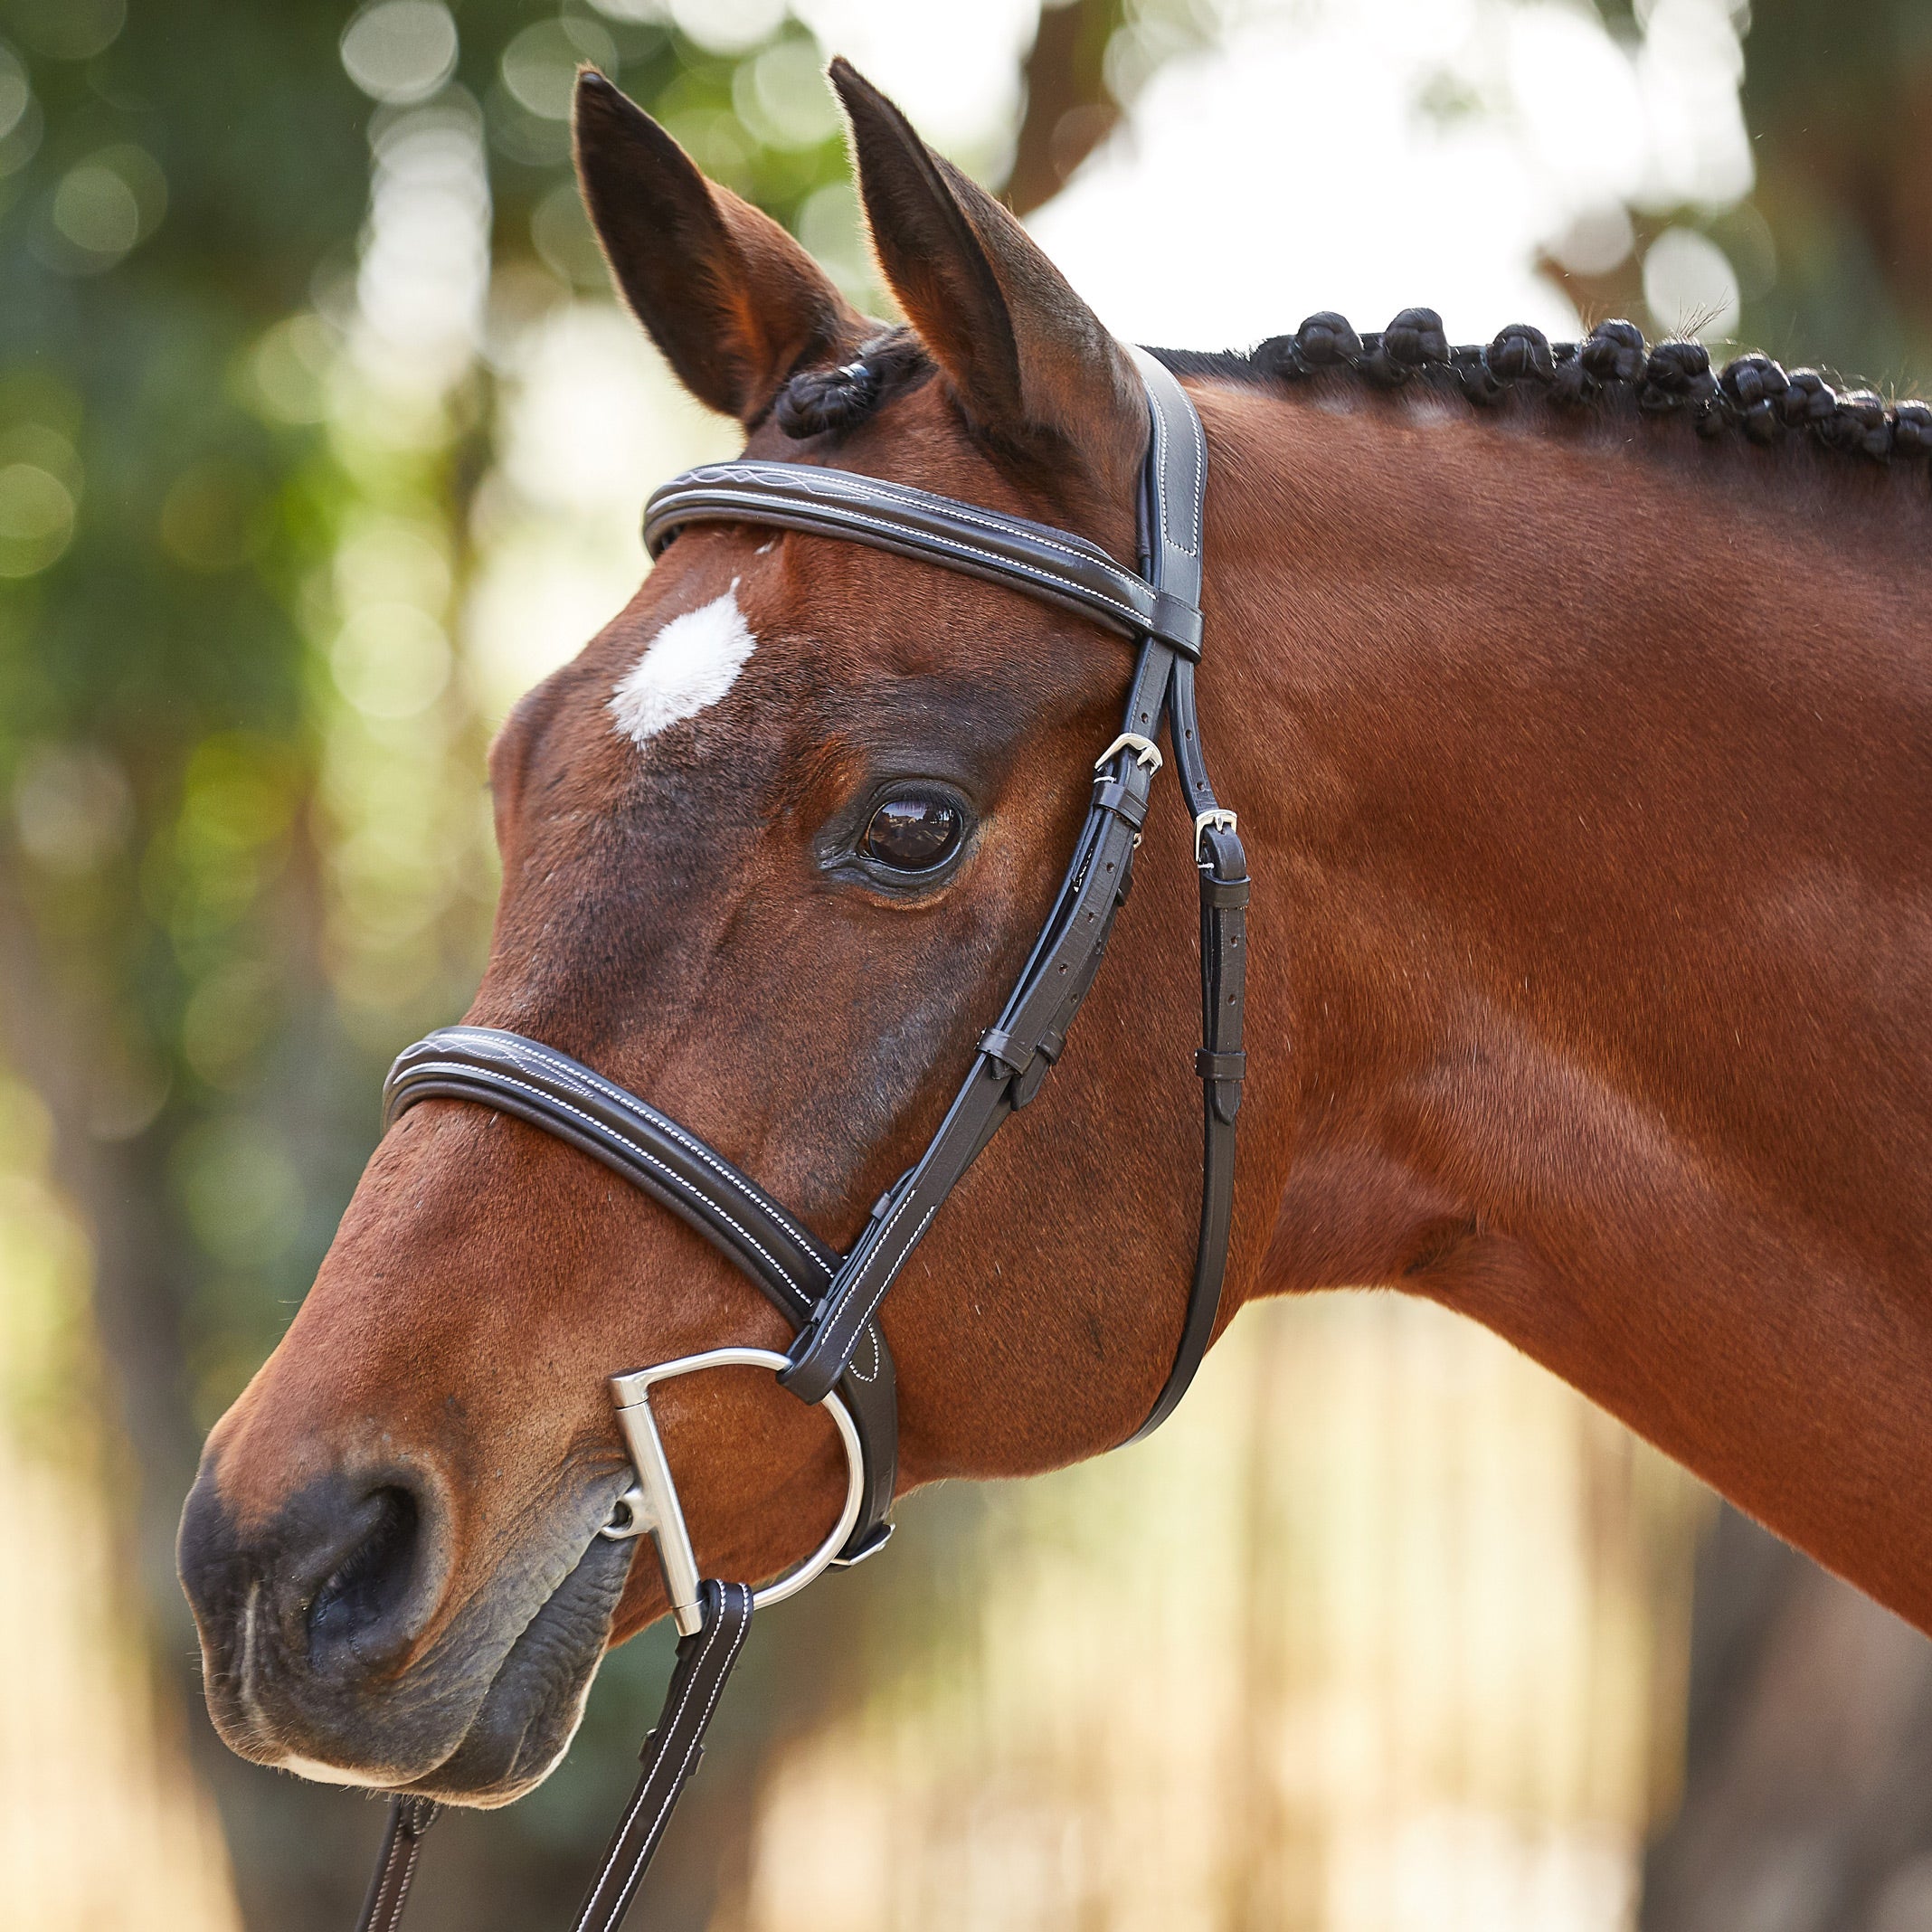 Requisite Snaffle Bridle and Reins Leather Riding Noseband Brow Band Robinsons 